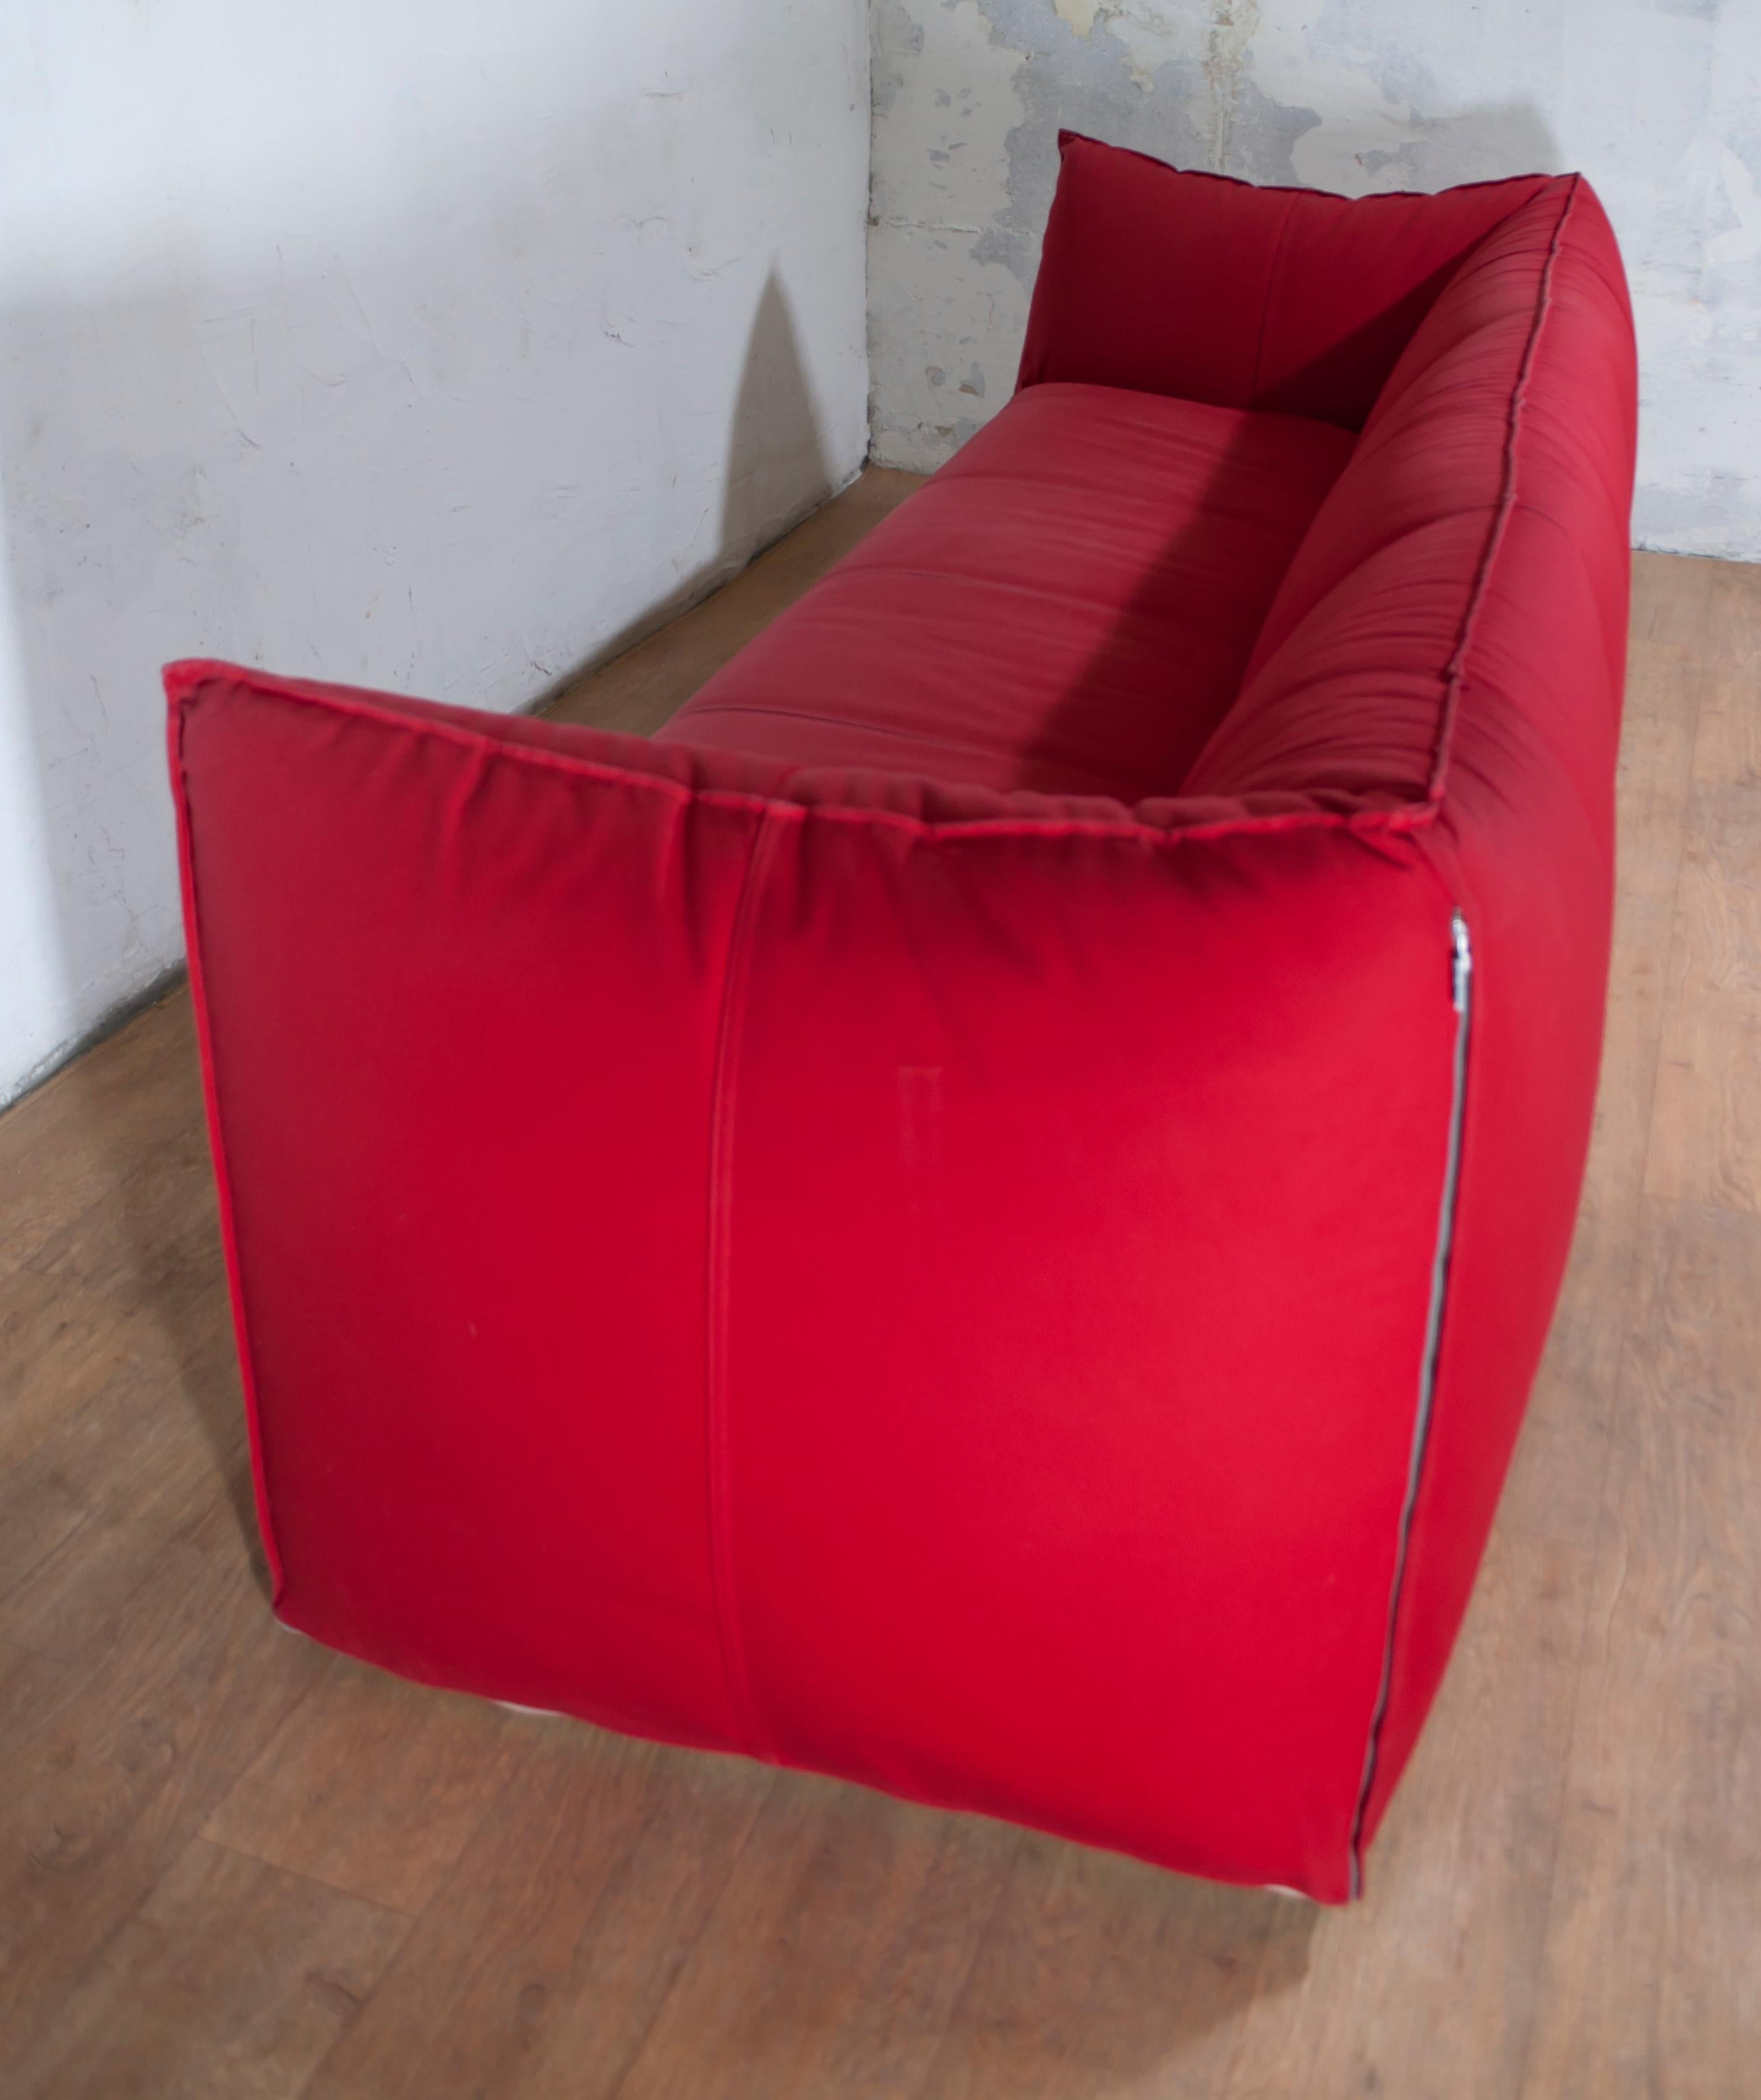 Mario Bellini Sofa and Pouf Tribambola Red Canvas Lining 